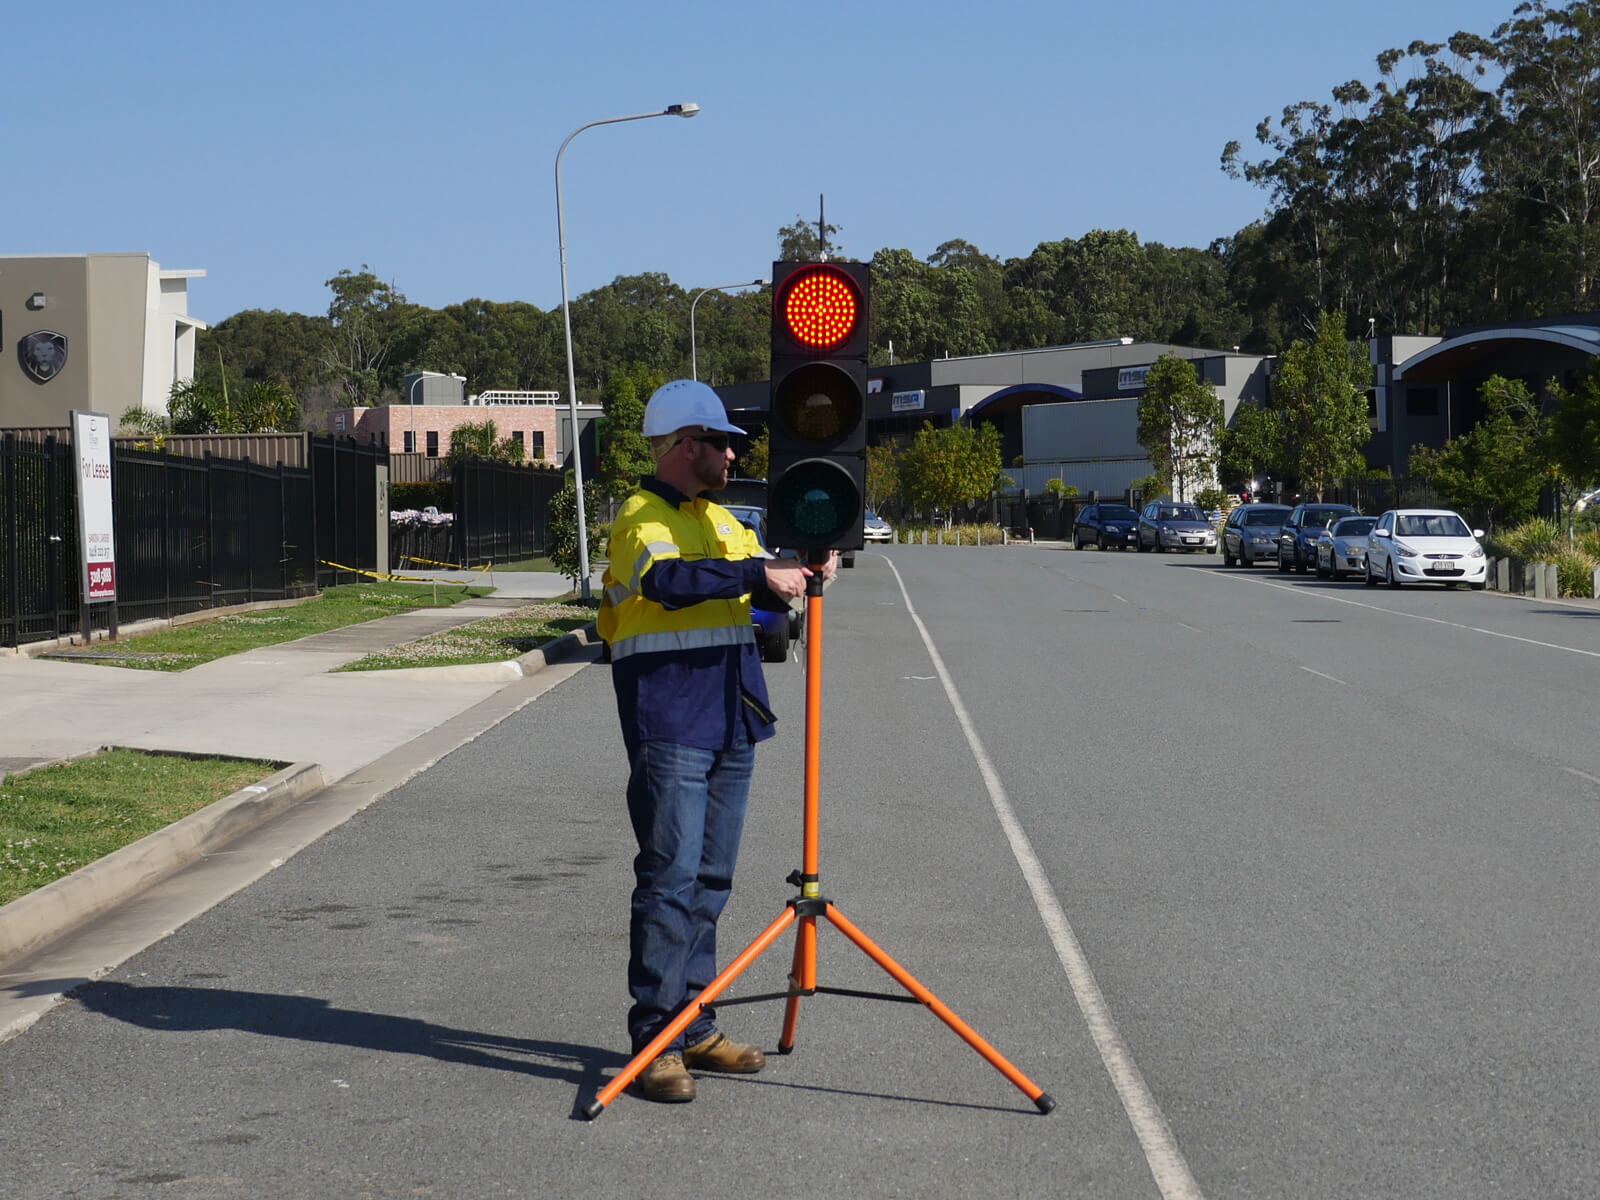 Portable Traffic Lights for Hire: Ensuring Safe and Efficient Traffic Control